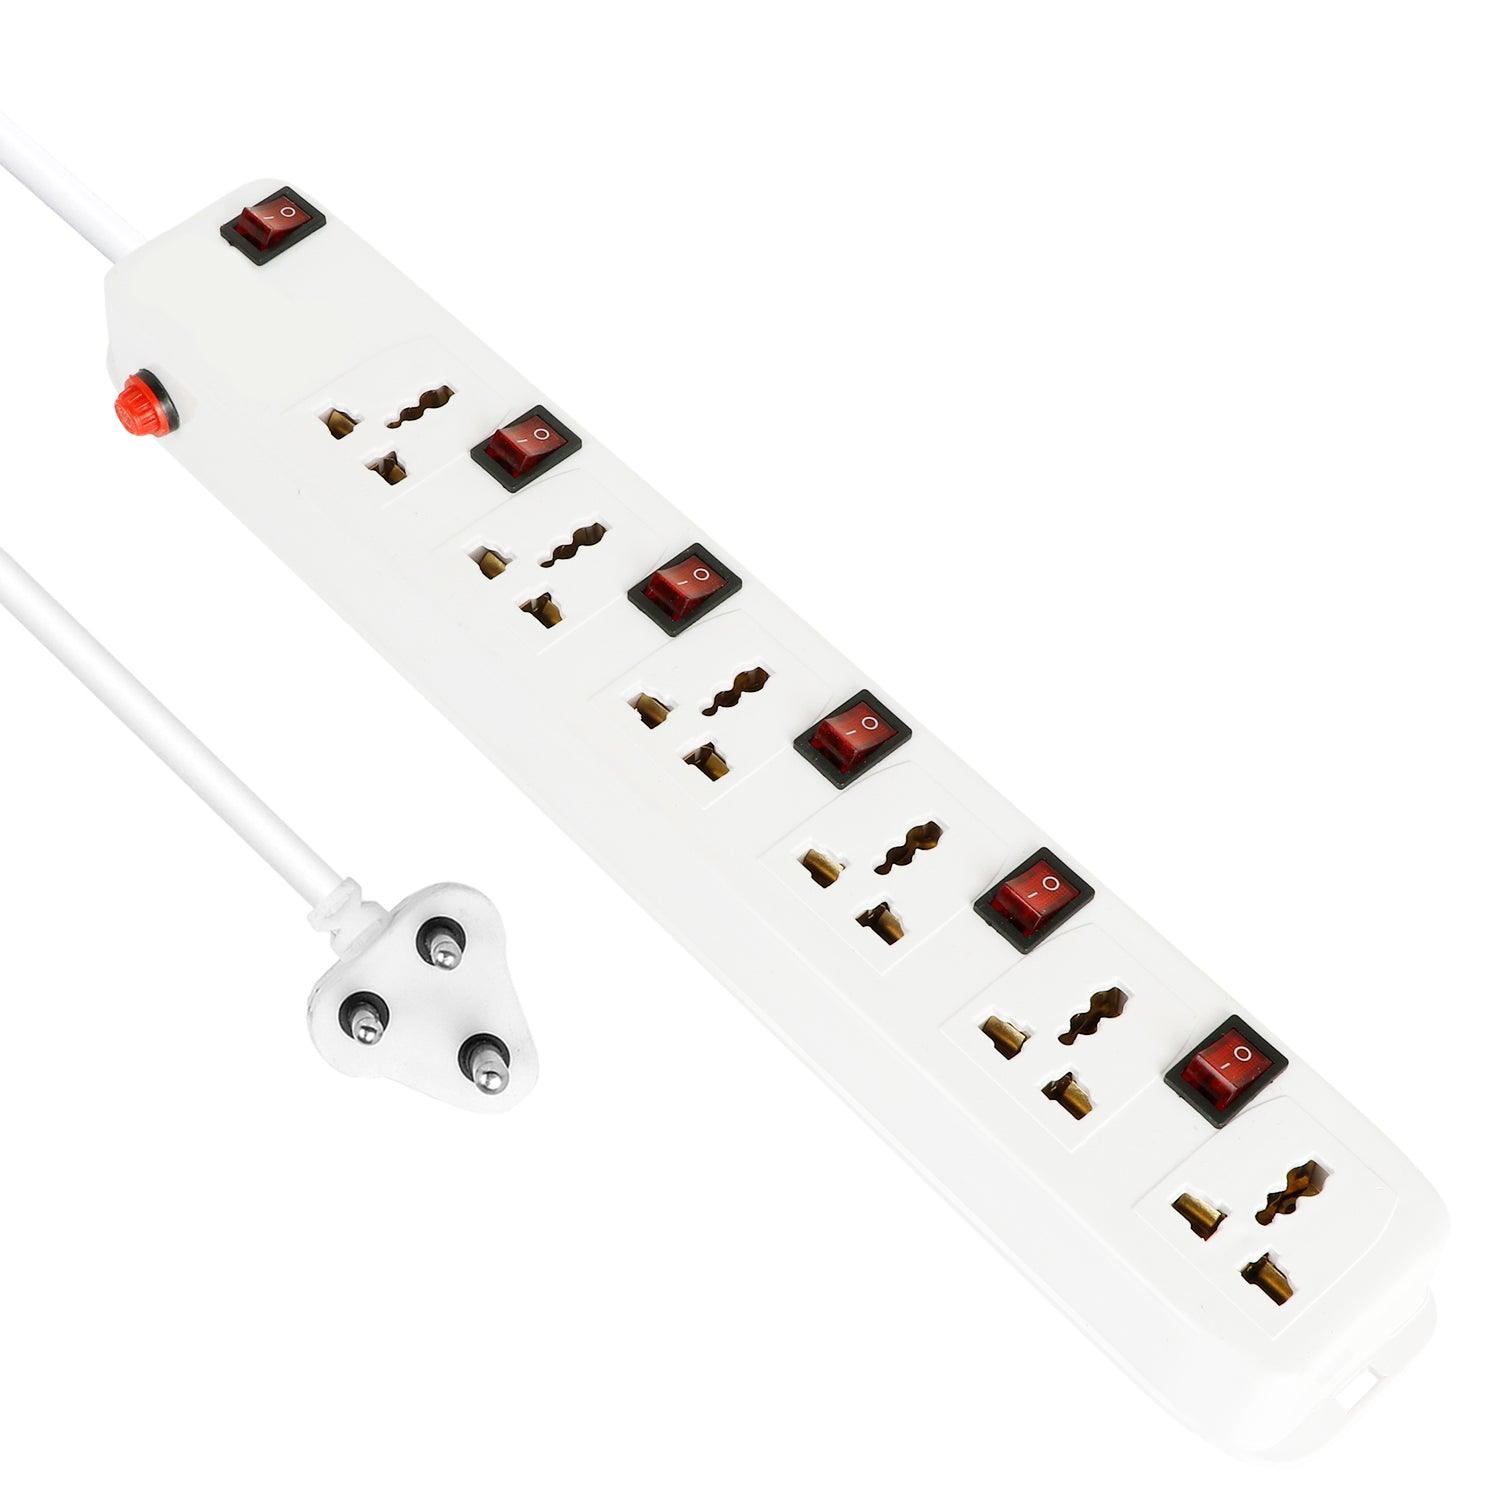 FEDUS Long Extension Board Extension Box | Spike Guard 6 Socket 6 Switch Junction Box with Switch, Extension Cords Cord, Spike Buster, Extension Board - FEDUS